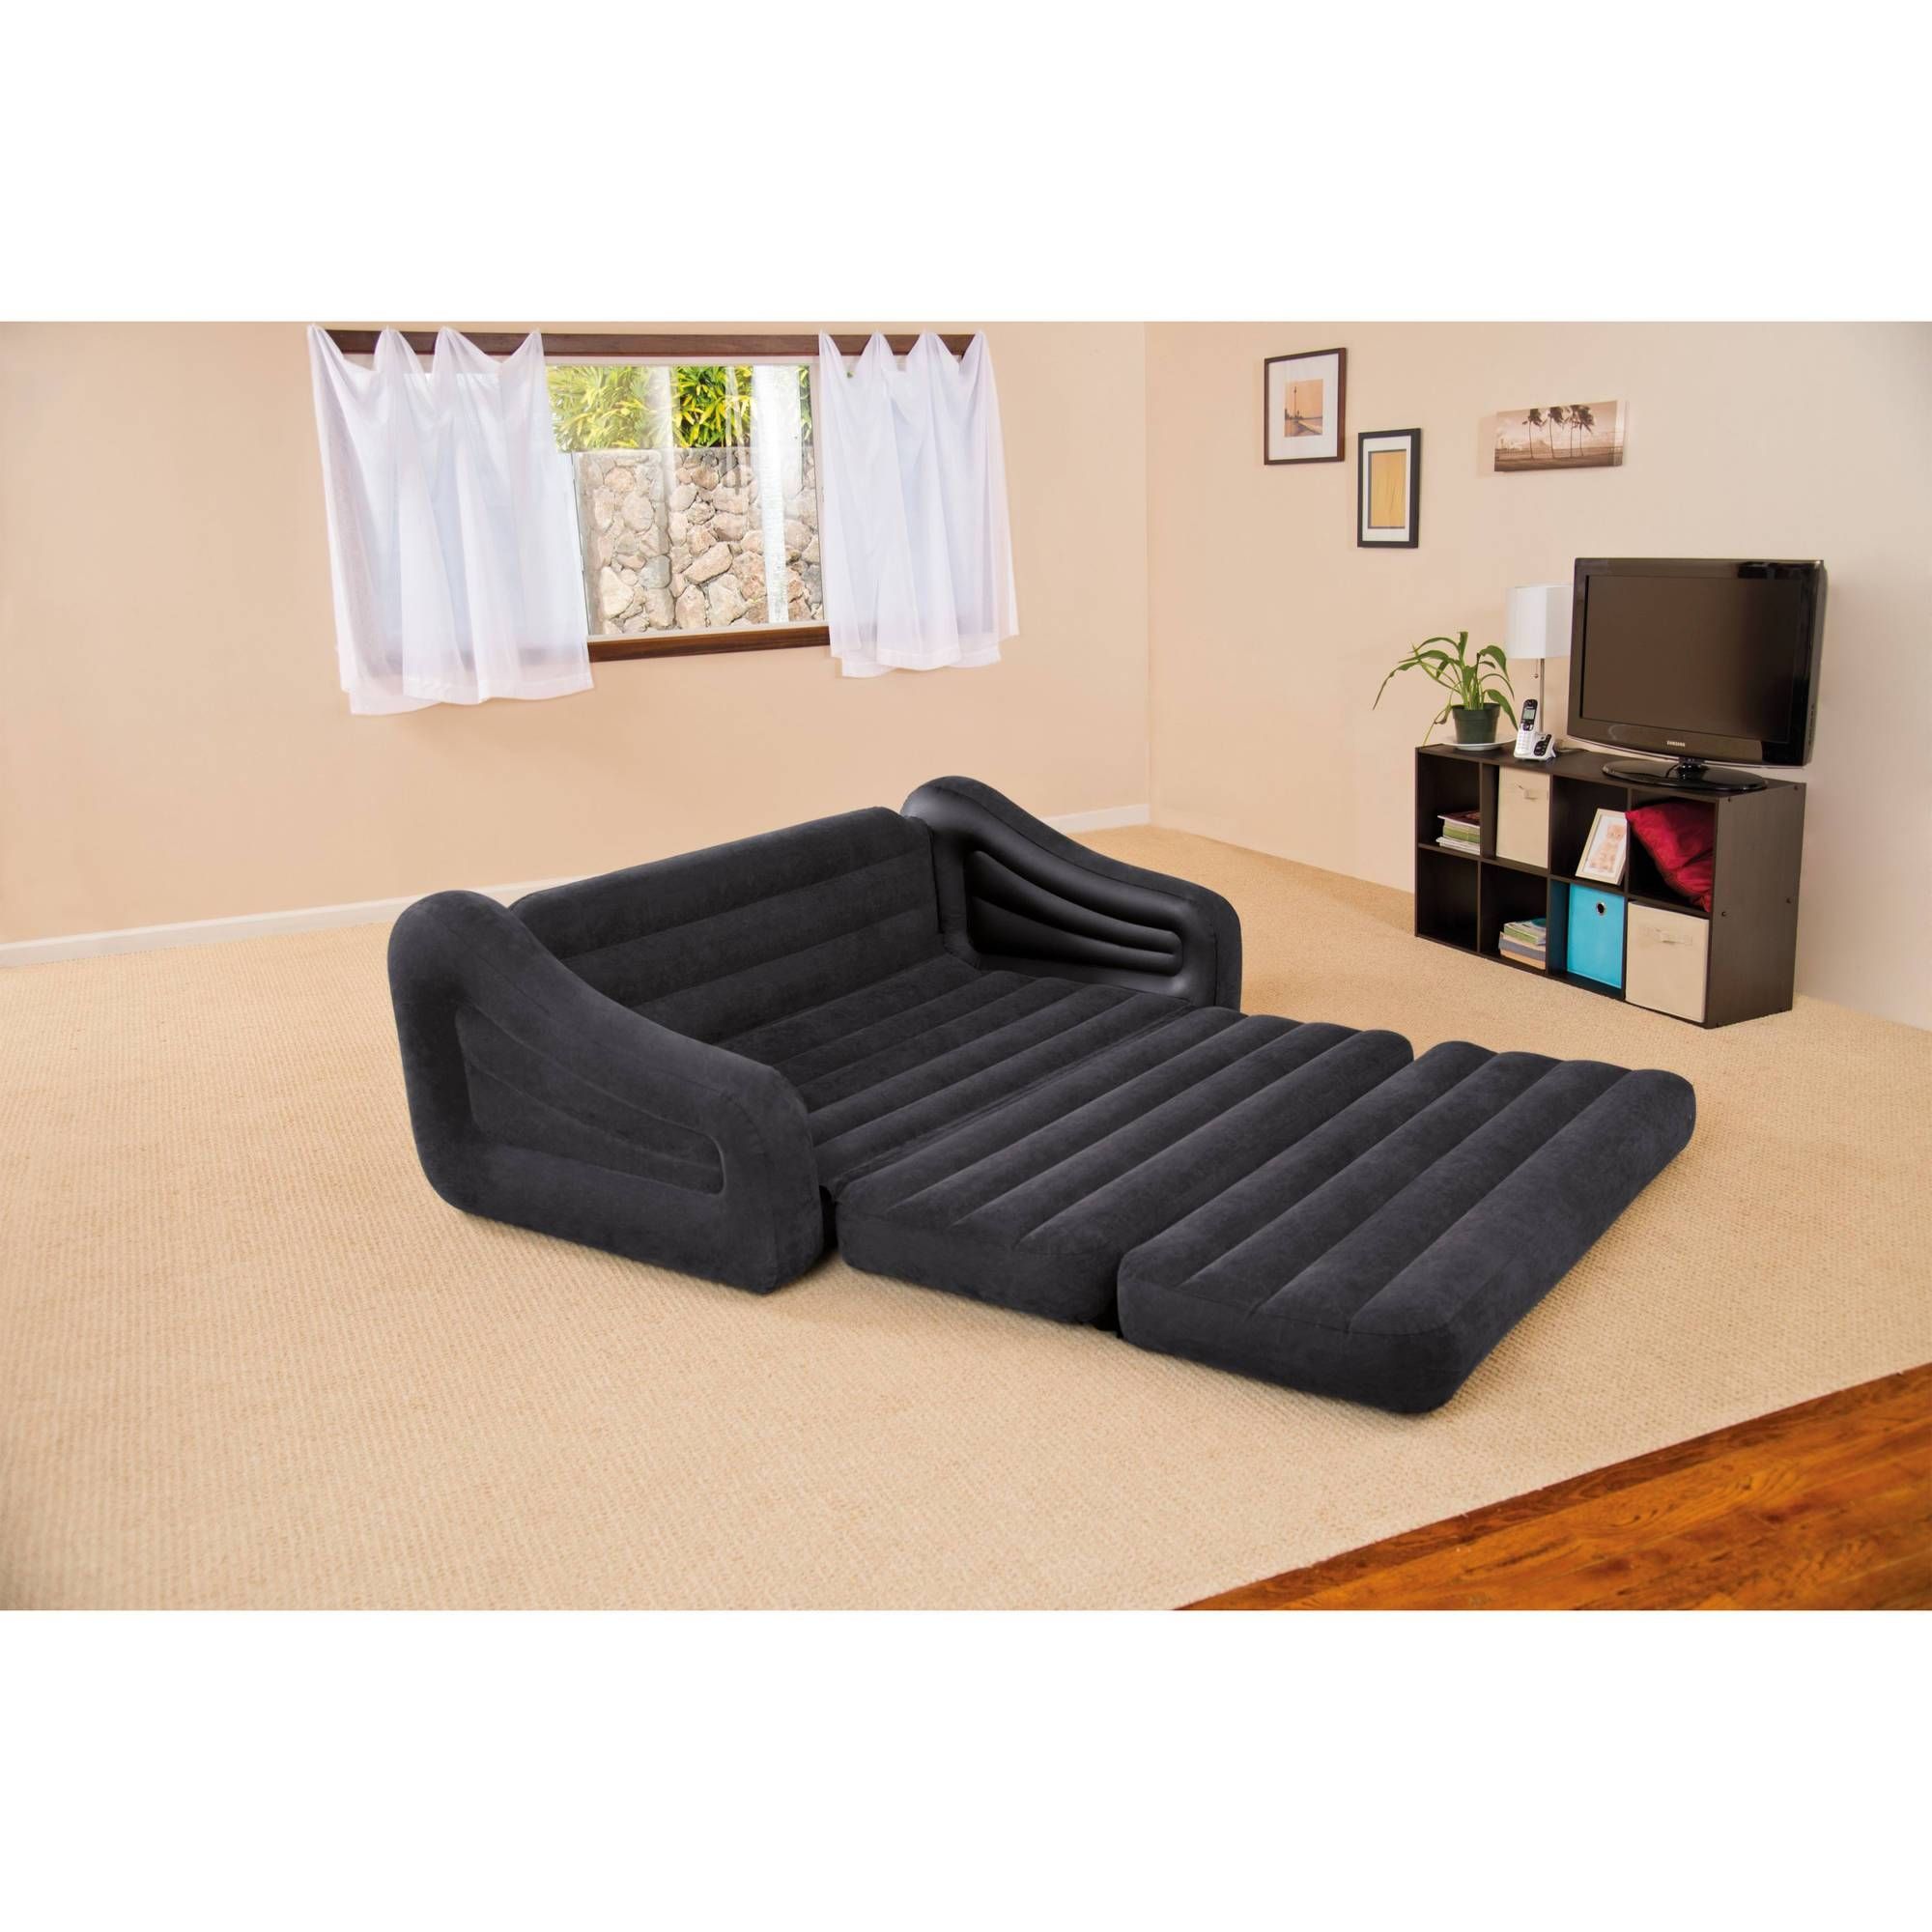 Intex Queen Inflatable Pull Out Sofa Bed – Walmart In Inflatable Pull Out Sofas (View 6 of 15)